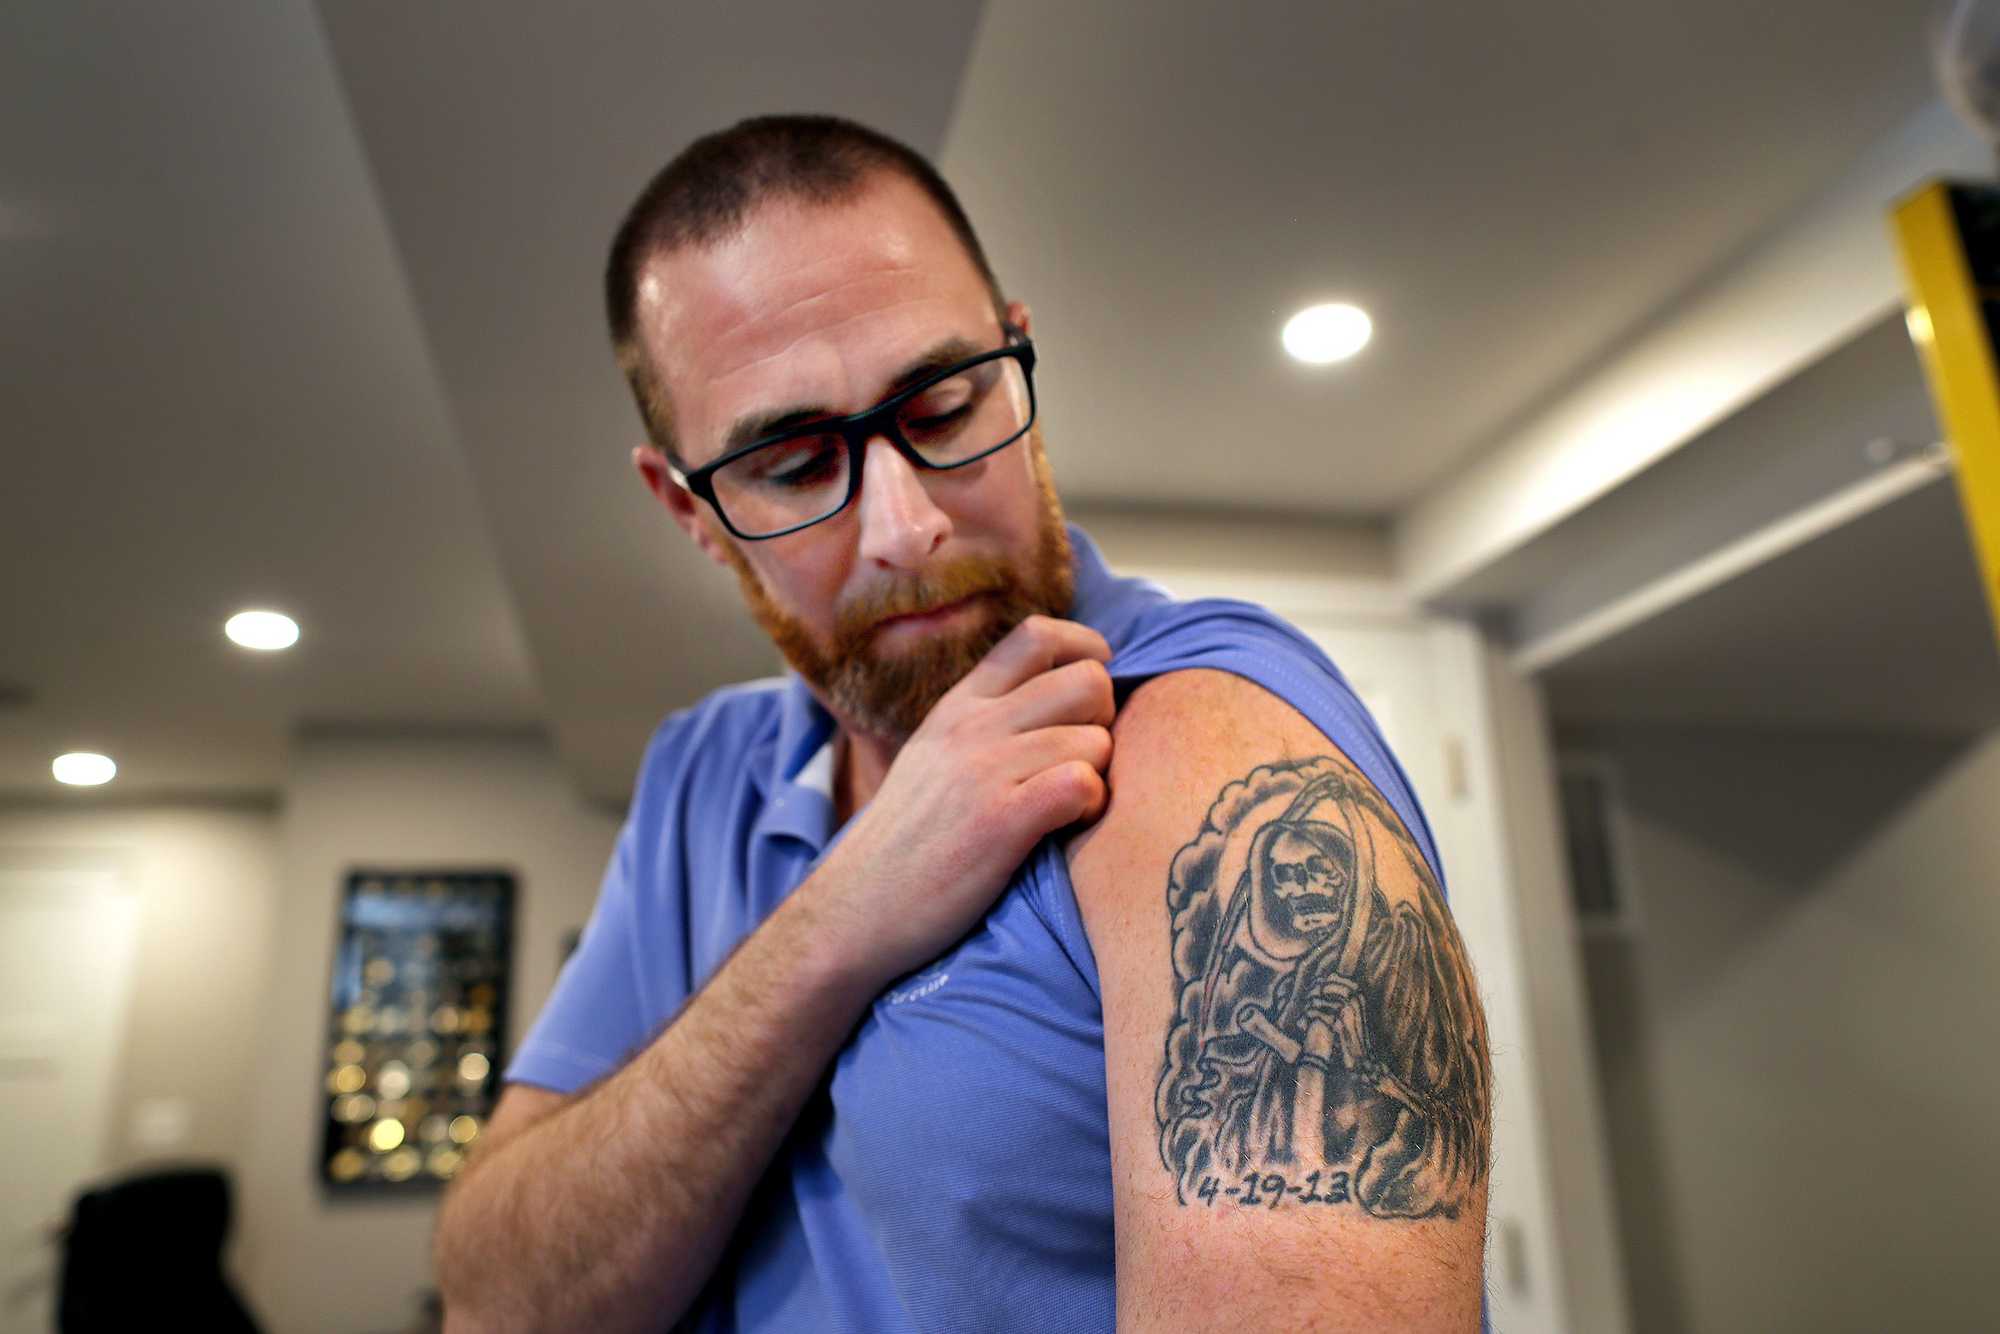 Dic Donohue got a tattoo in 2013 that he calls "cheating death." It includes the date that he was shot.